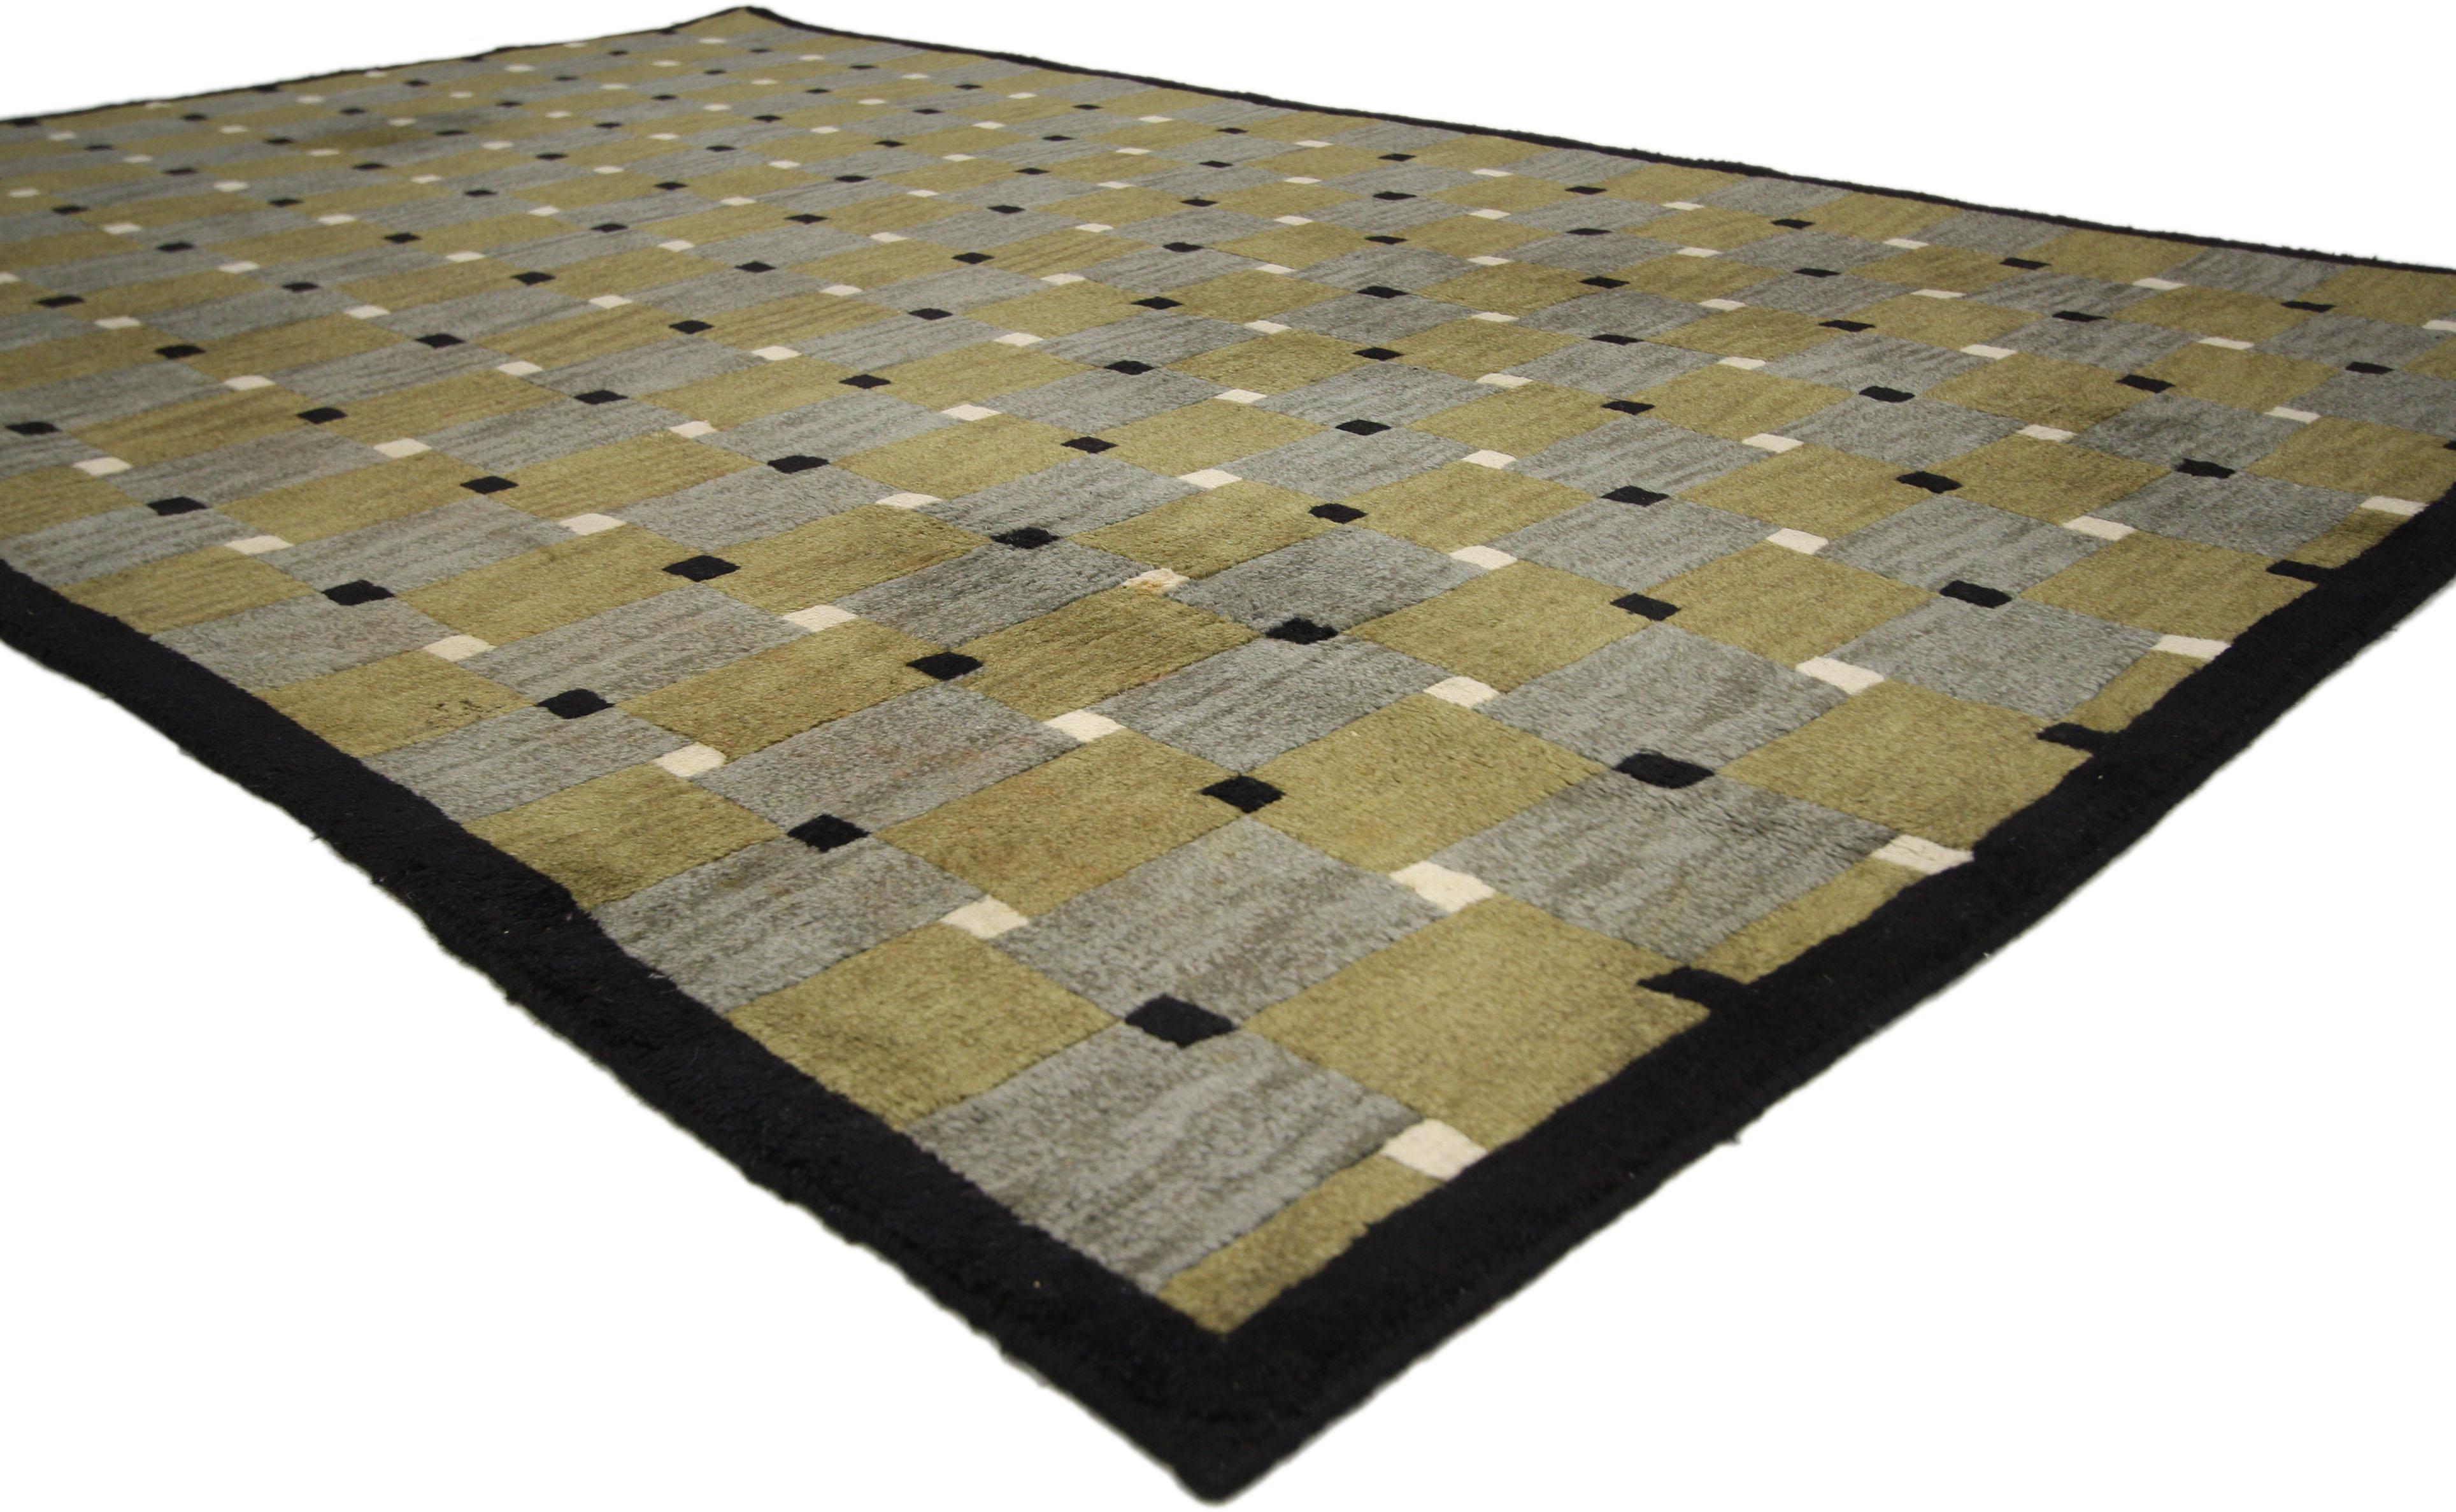 74843, vintage Tibetan rug with checkered square pattern and modern style. This vintage Tibetan rug with checkered square pattern and modern style features alternating large-scale squares connected by small-scale squares. A thin black border frames